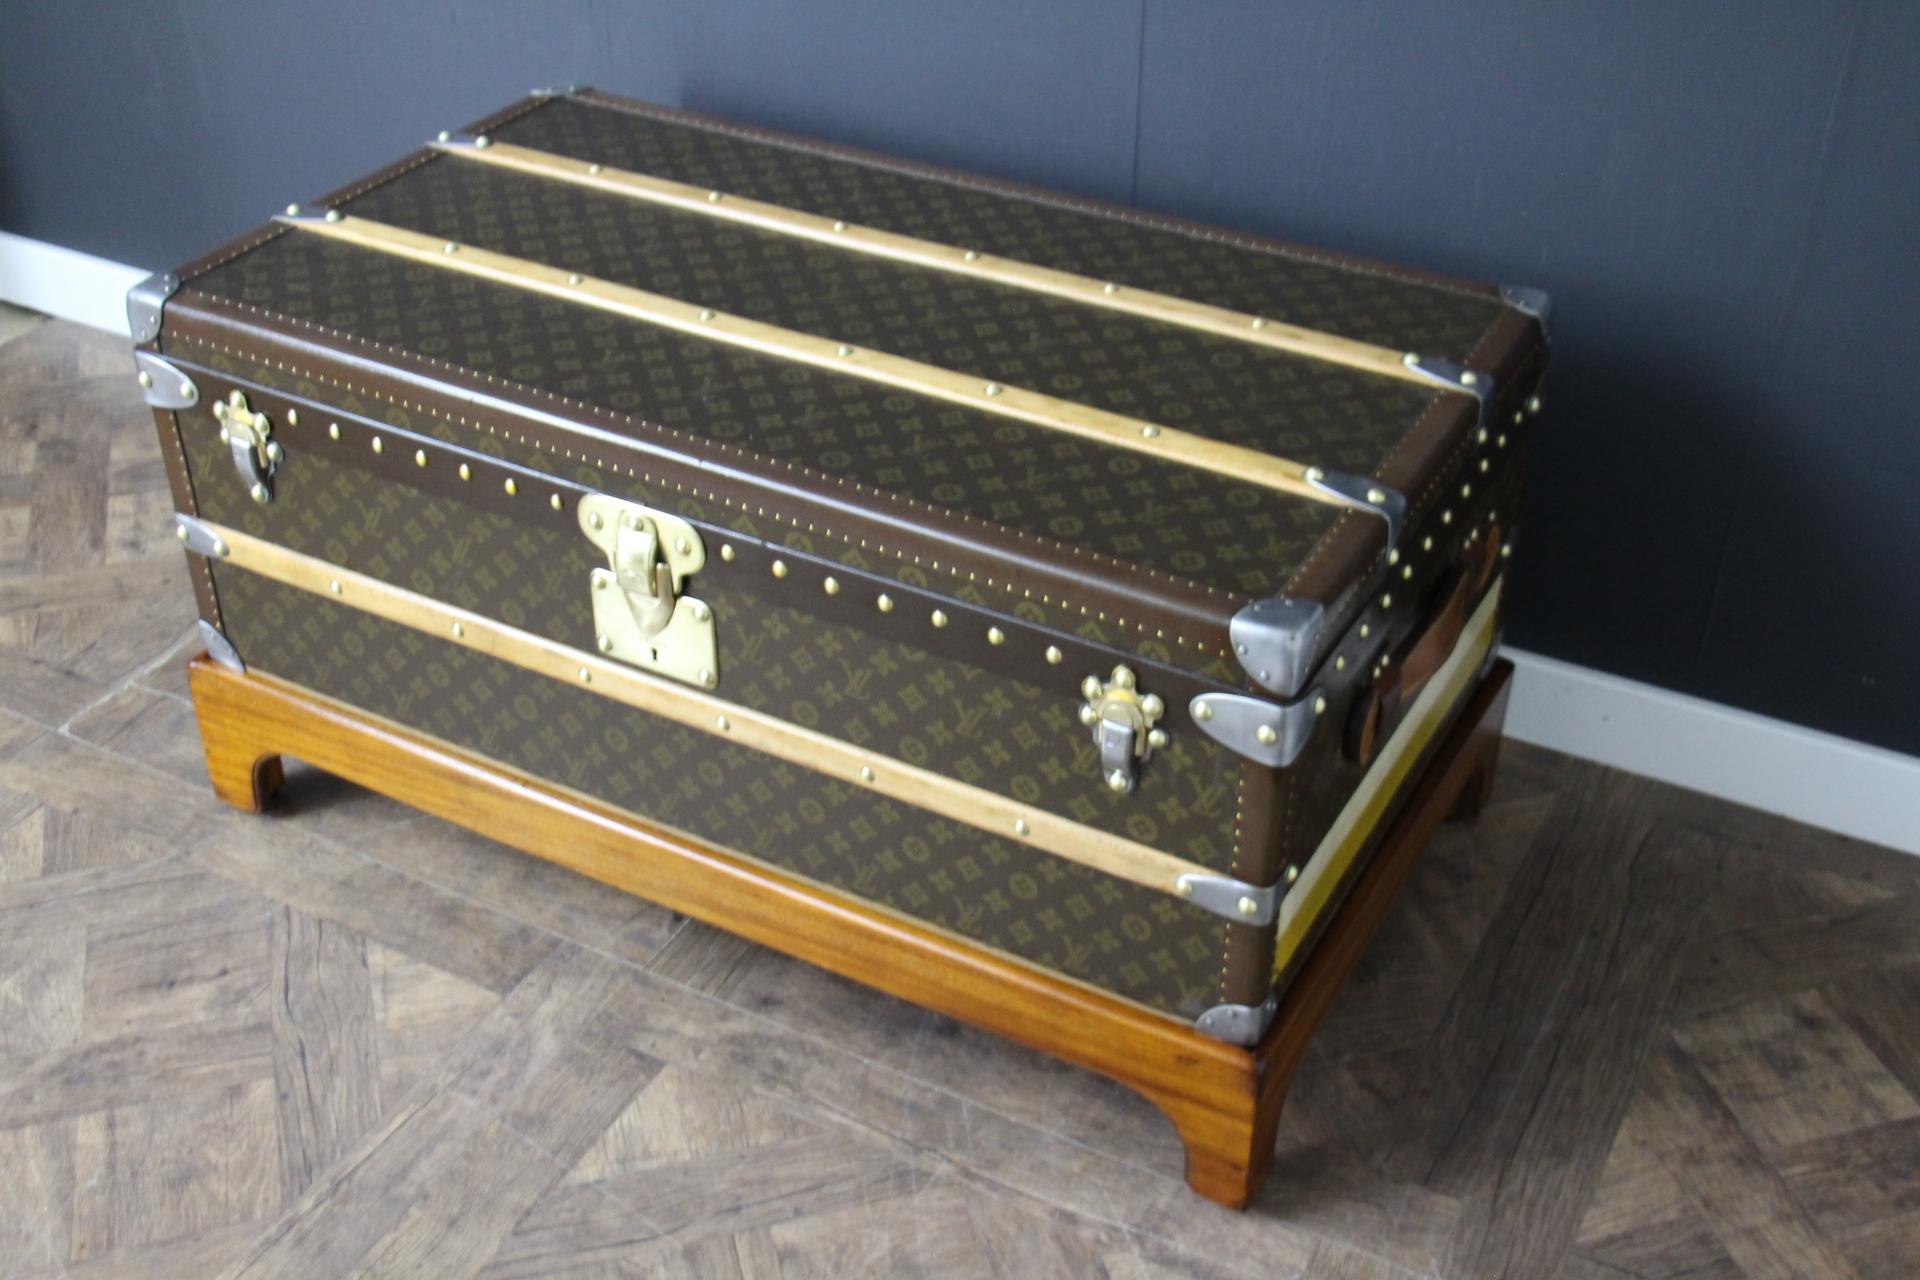 This very nice Louis Vuitton trunk features hand stenciled monogram canvas , chocolate brown color lozine trim and Louis Vuitton stamped solid brass locks and brass and steel clasps, as well as large leather side handles. Its patina is warm and